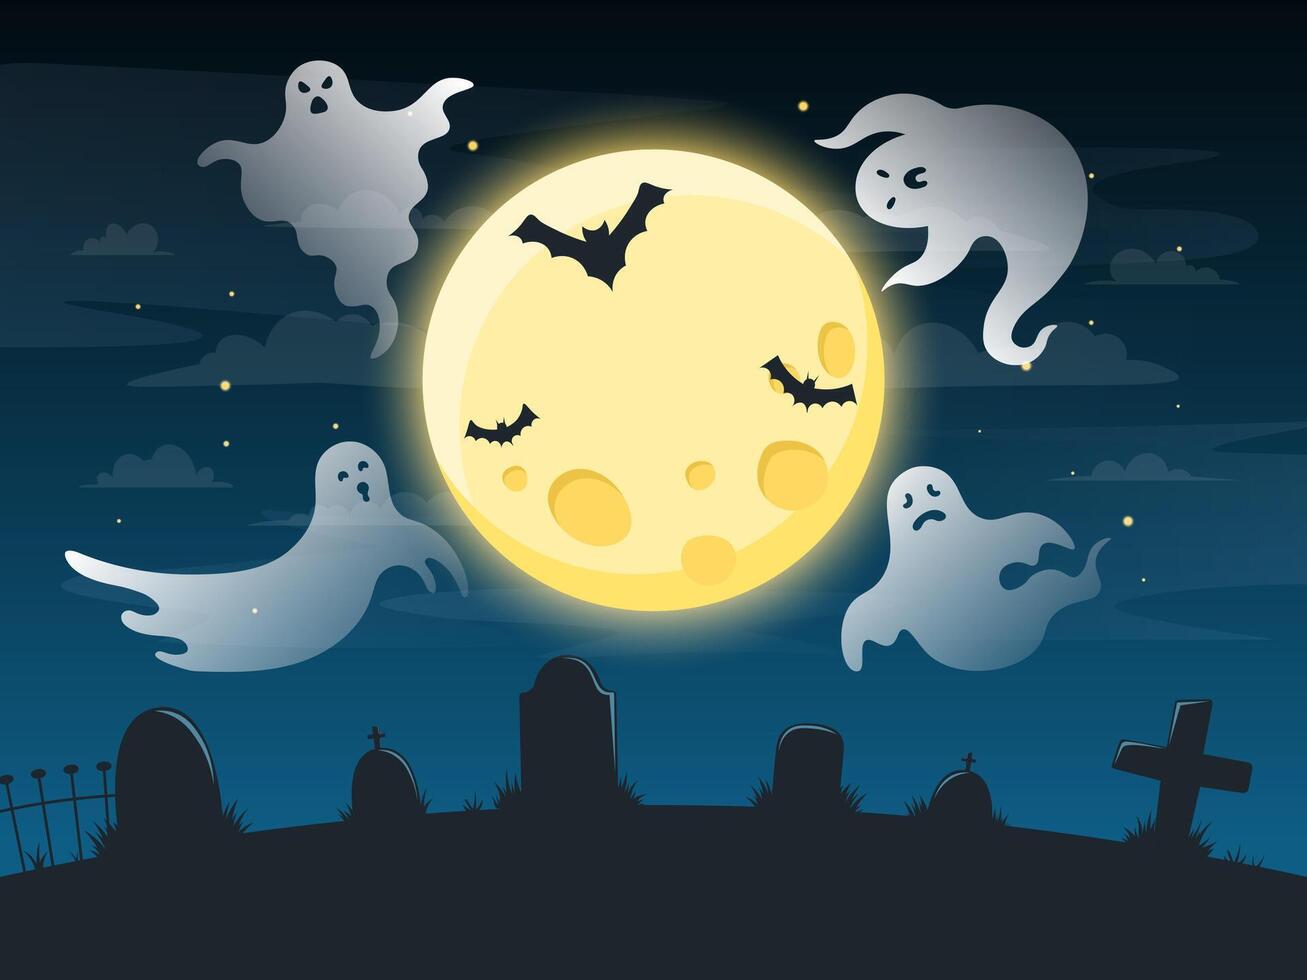 Halloween creepy poster. Flying scare ghosts, spooky ghost halloween character on dark ominous background, halloween poster vector illustration